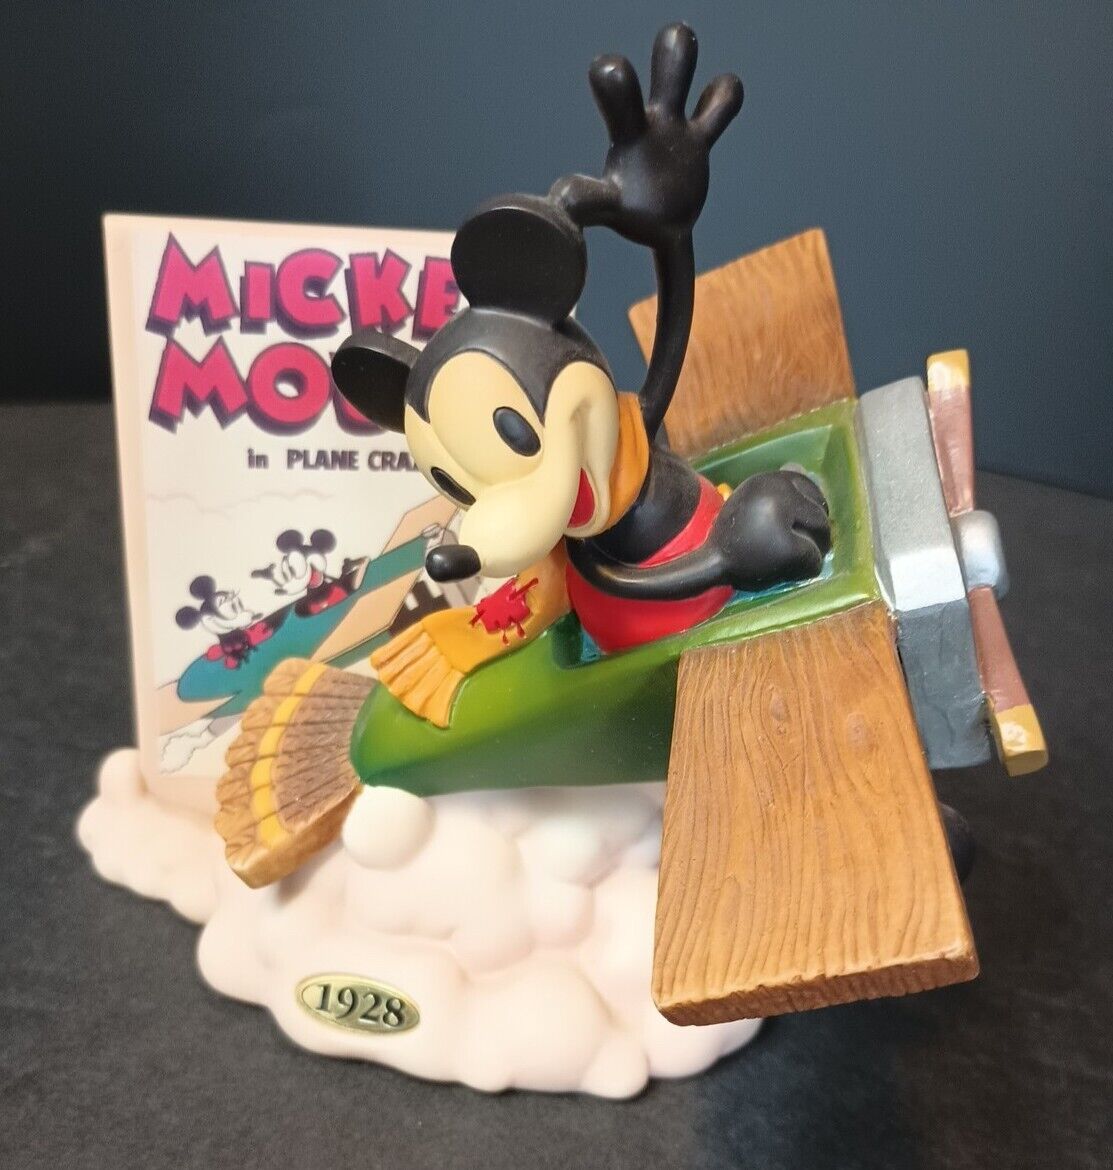 Vtg 1998 Disney Mickey Mouse Figurine In Plane Crazy 1928 Limit Edition Retired